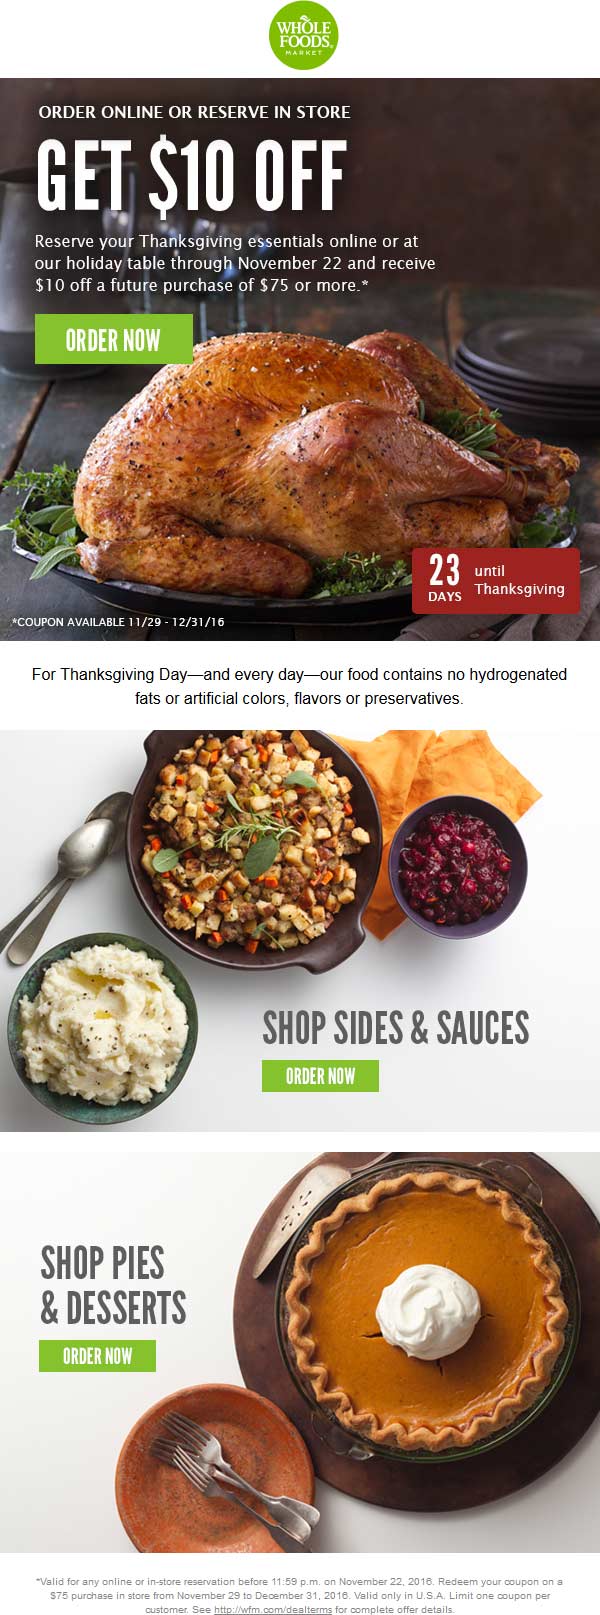 View Whole Foods Thanksgiving 2021 Promo Code Background